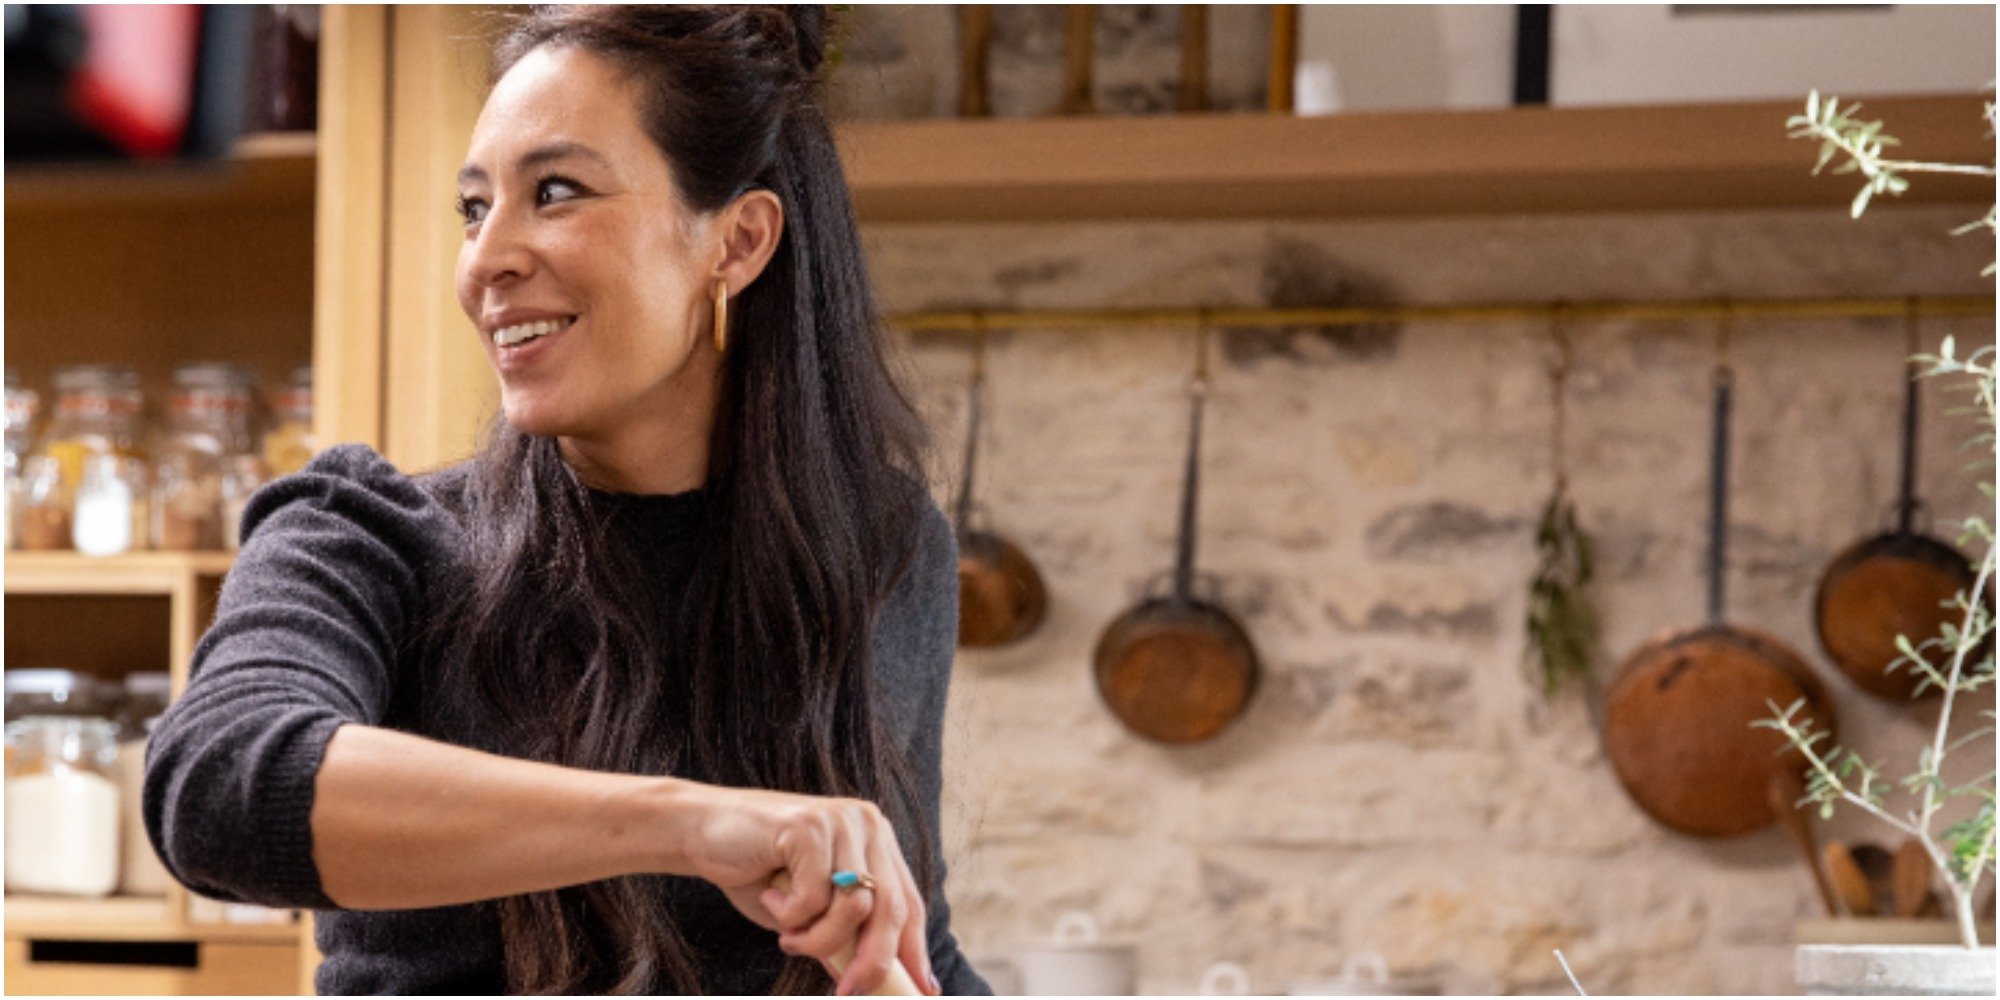 Joanna Gaines looks away from the camera on the set of her cooking show.